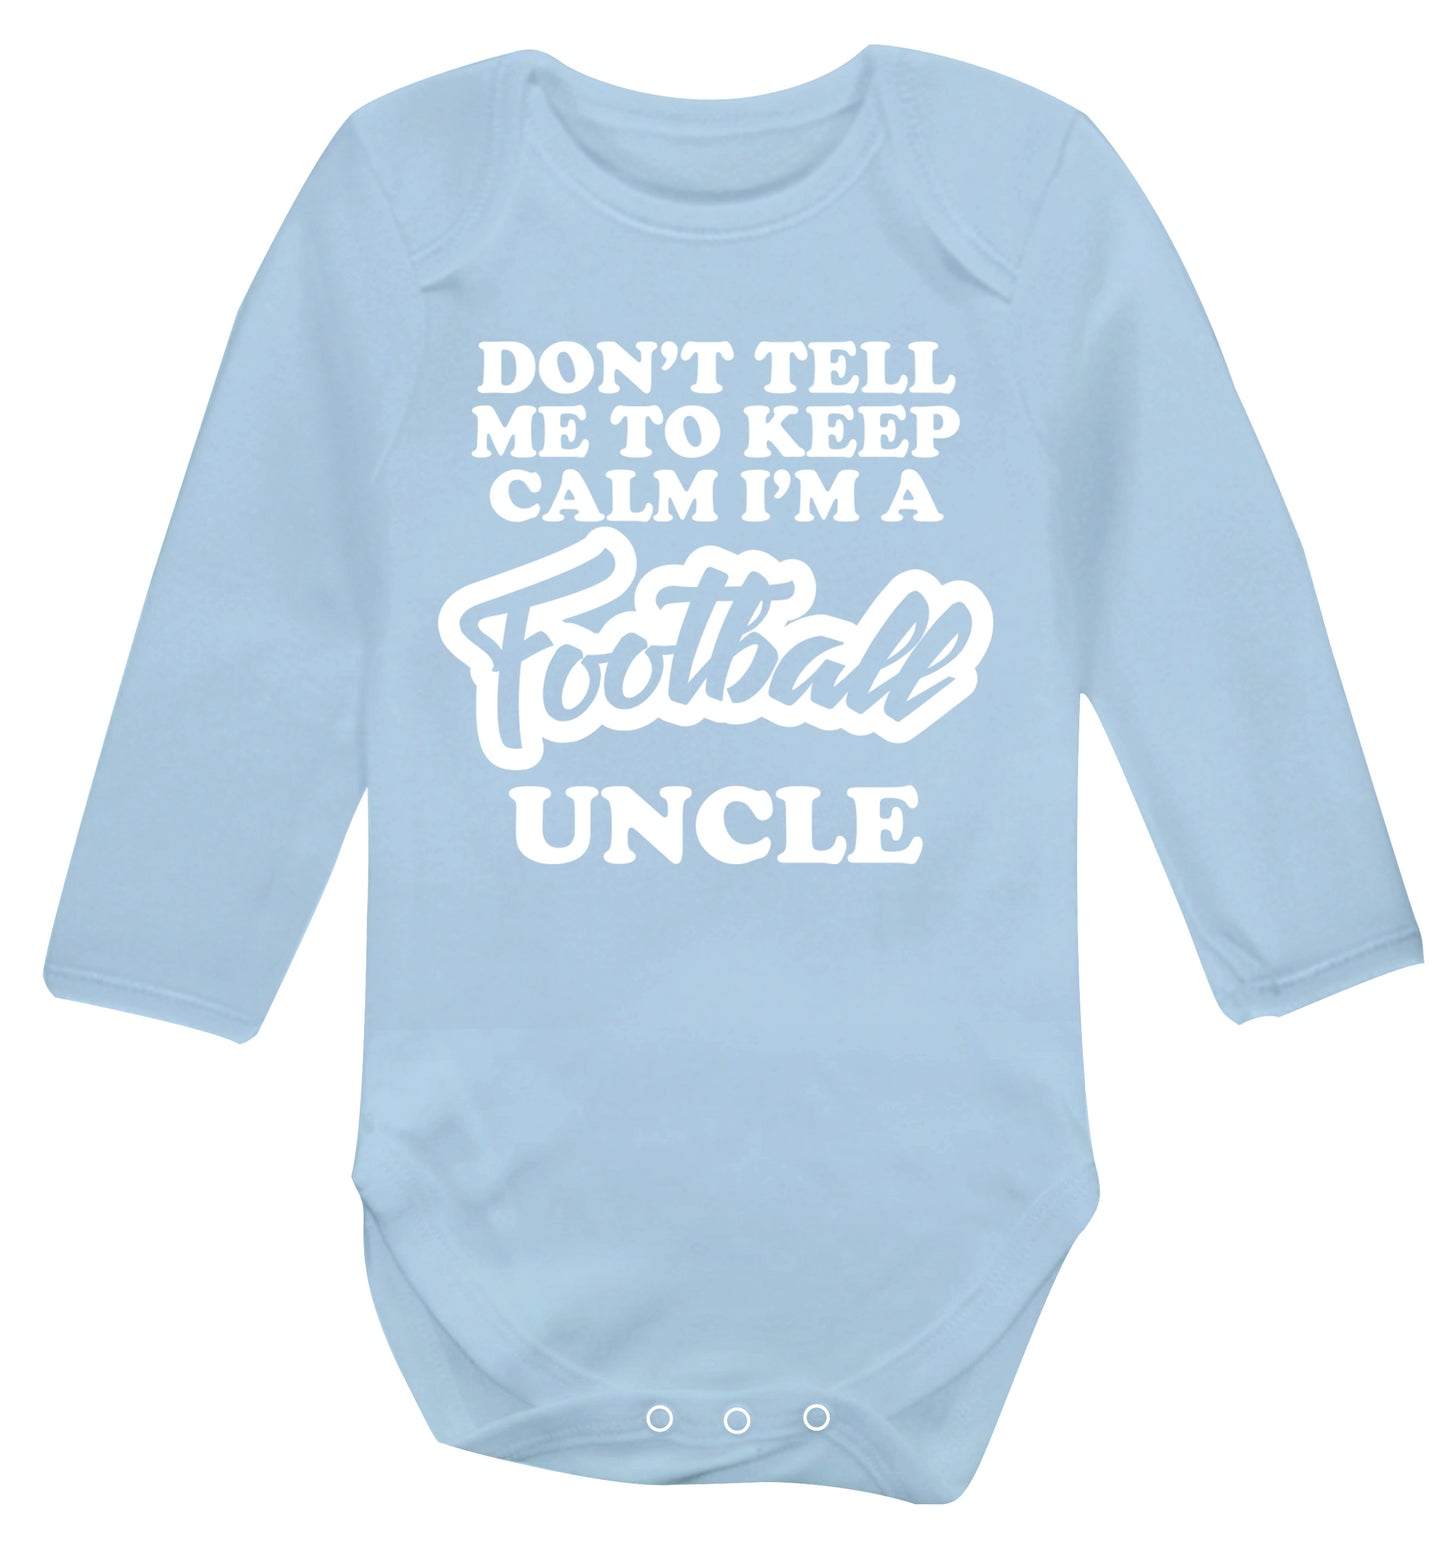 Don't tell me to keep calm I'm a football uncle Baby Vest long sleeved pale blue 6-12 months